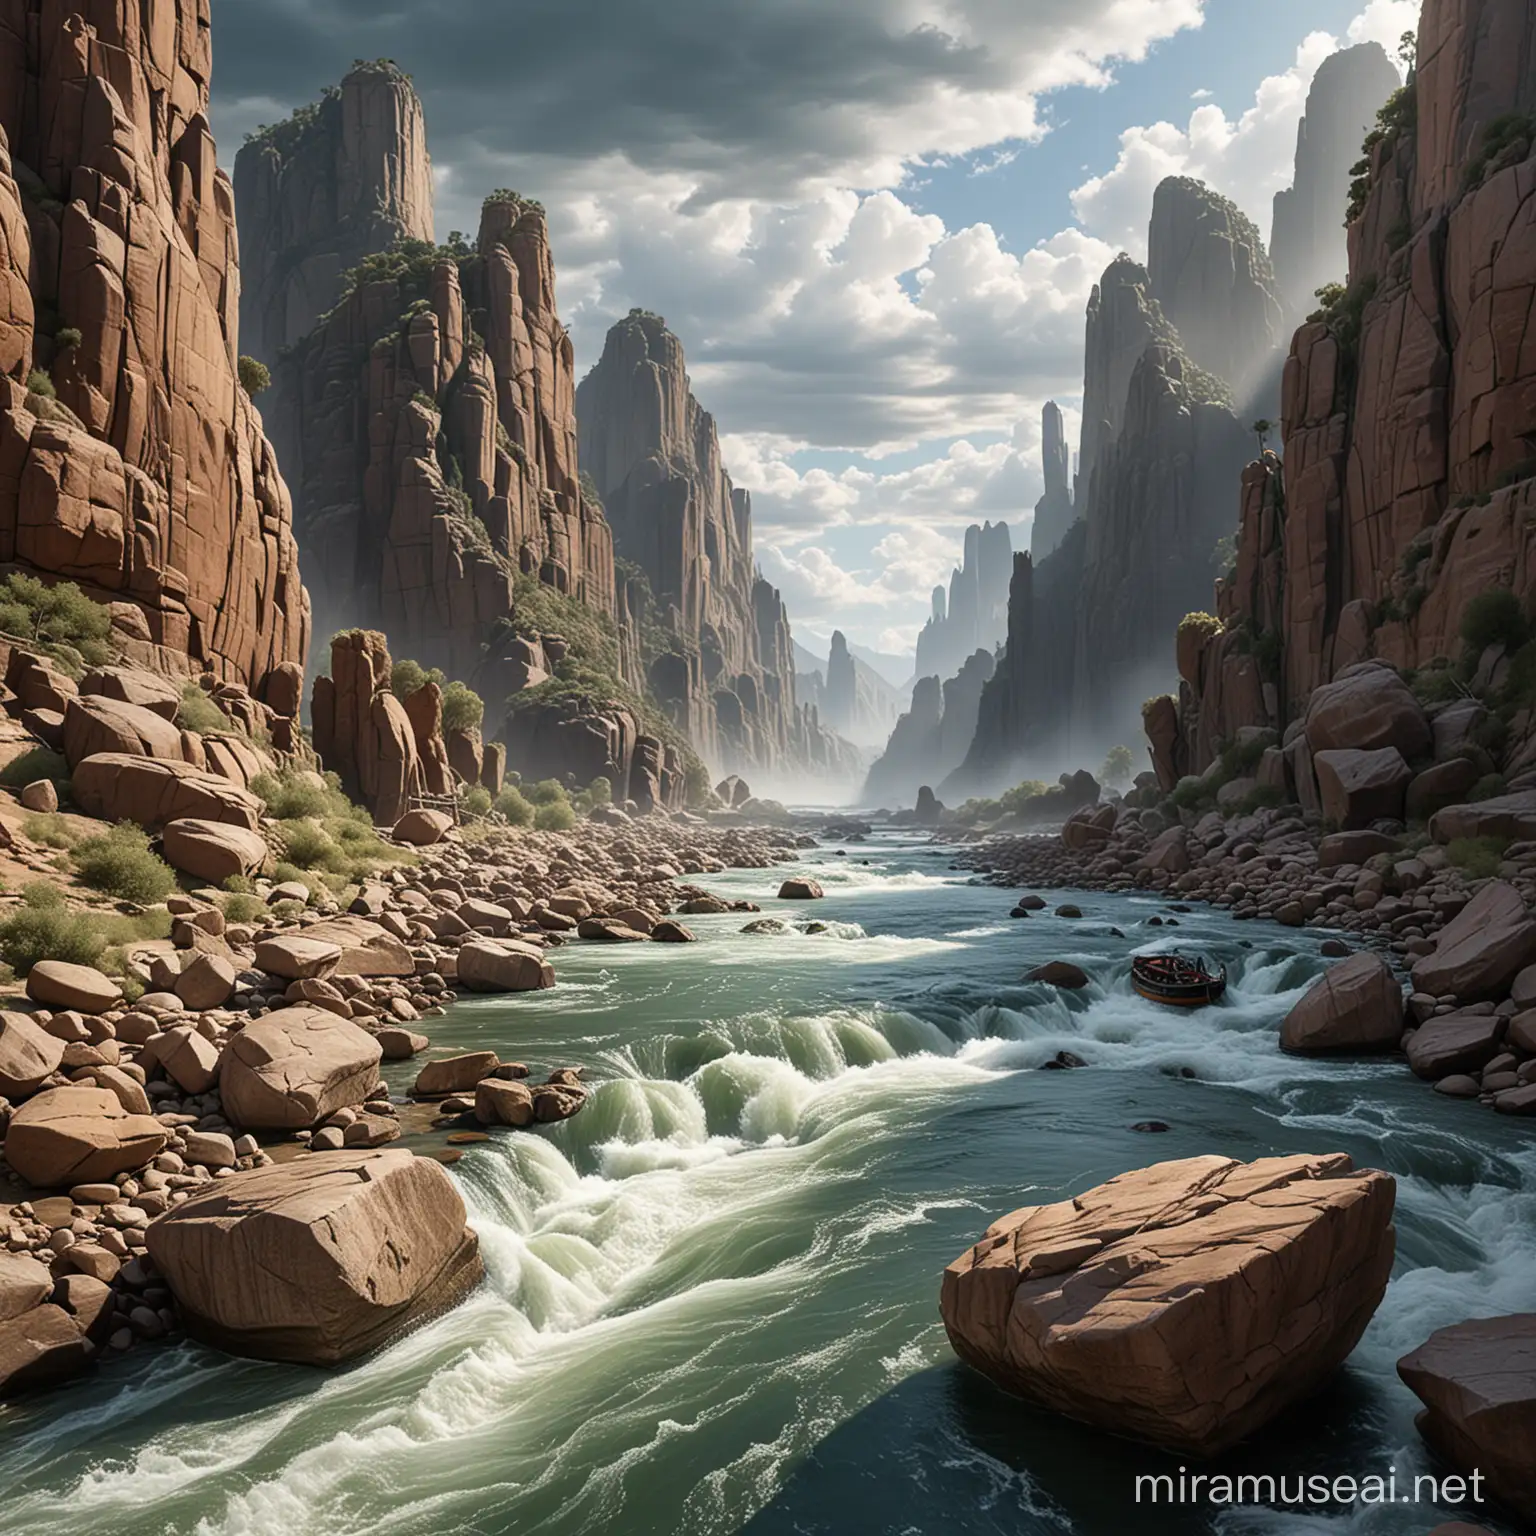 Shield-Captain,The image shows a river flowing between large rocks, with no specific details about any buildings, boats, or cityscape present. It captures a natural landscape with water and sky elements.